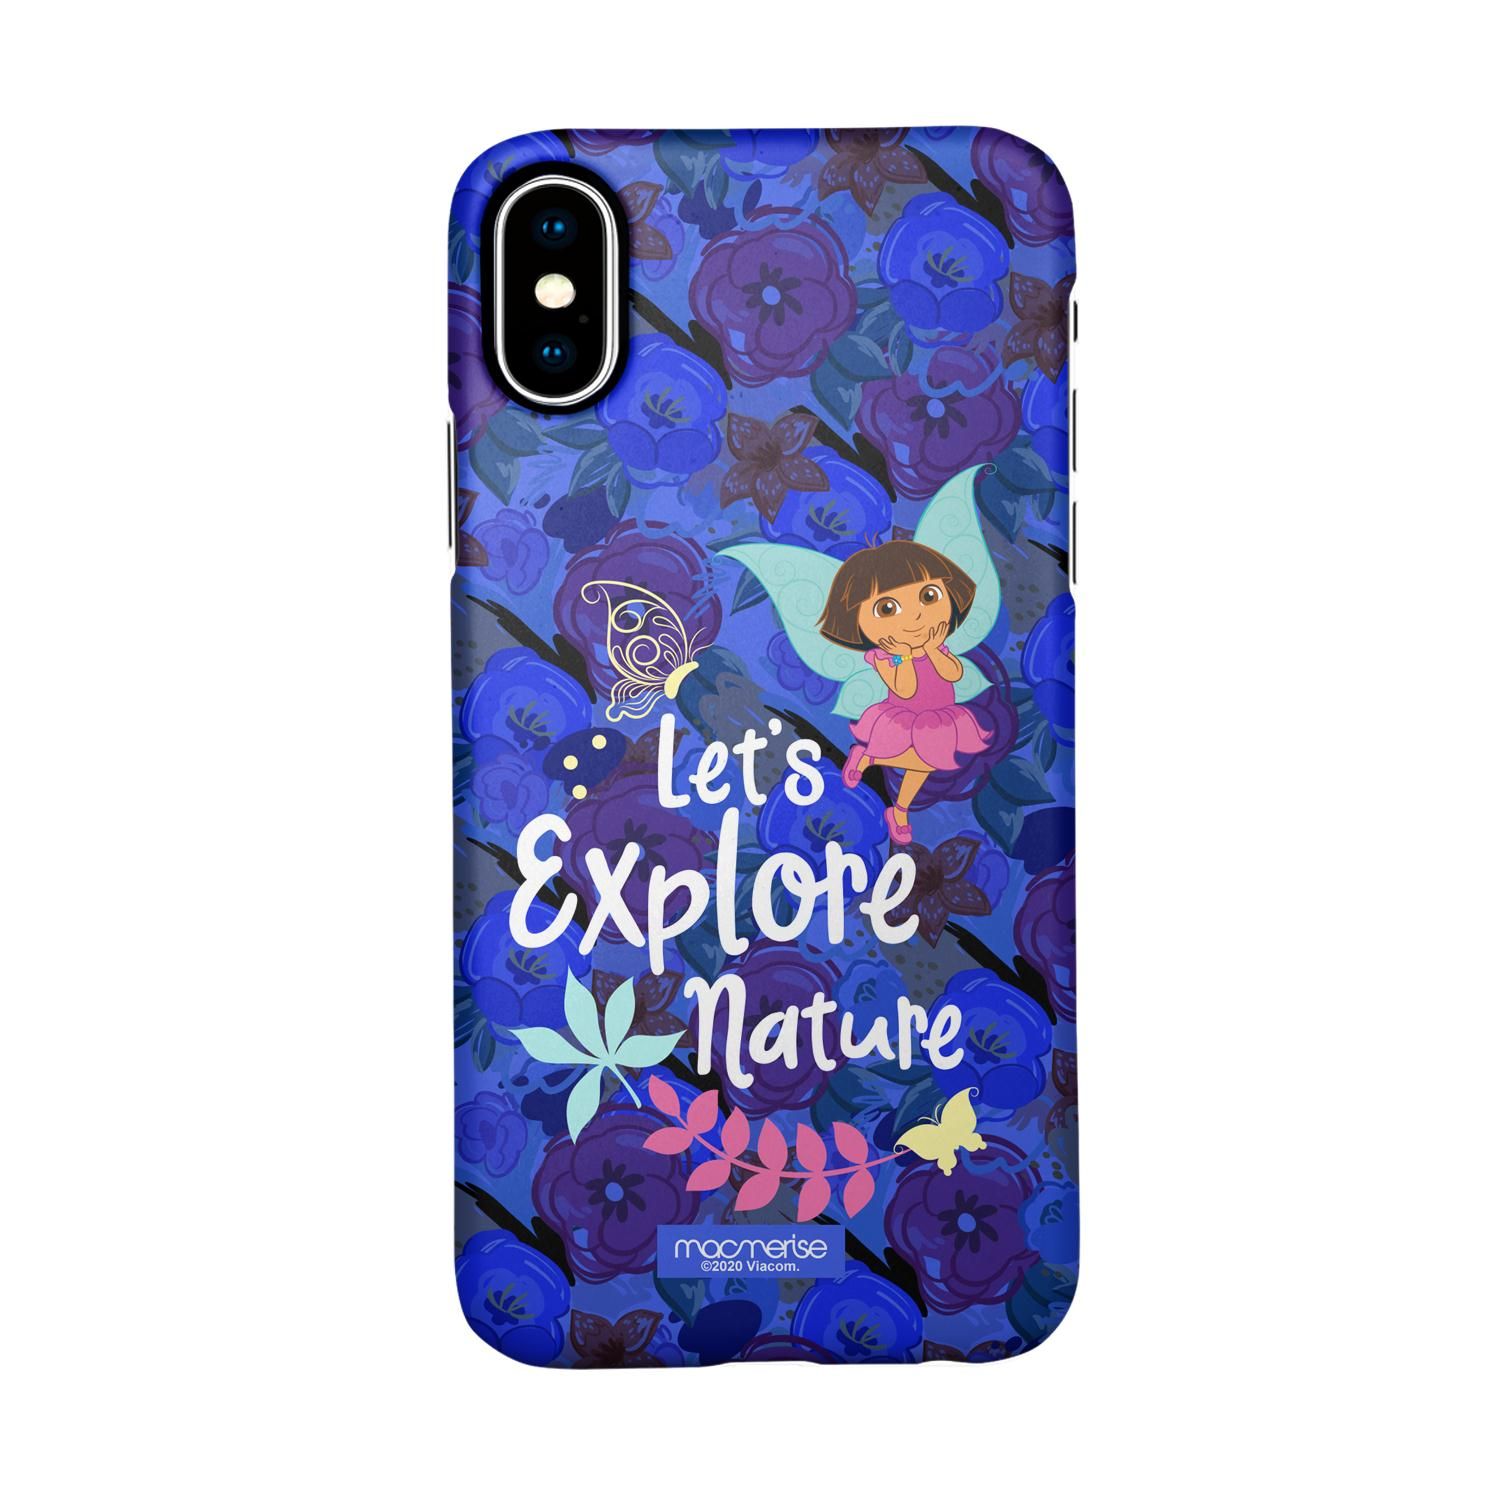 Explore with dora Blue - Sleek Case for iPhone X